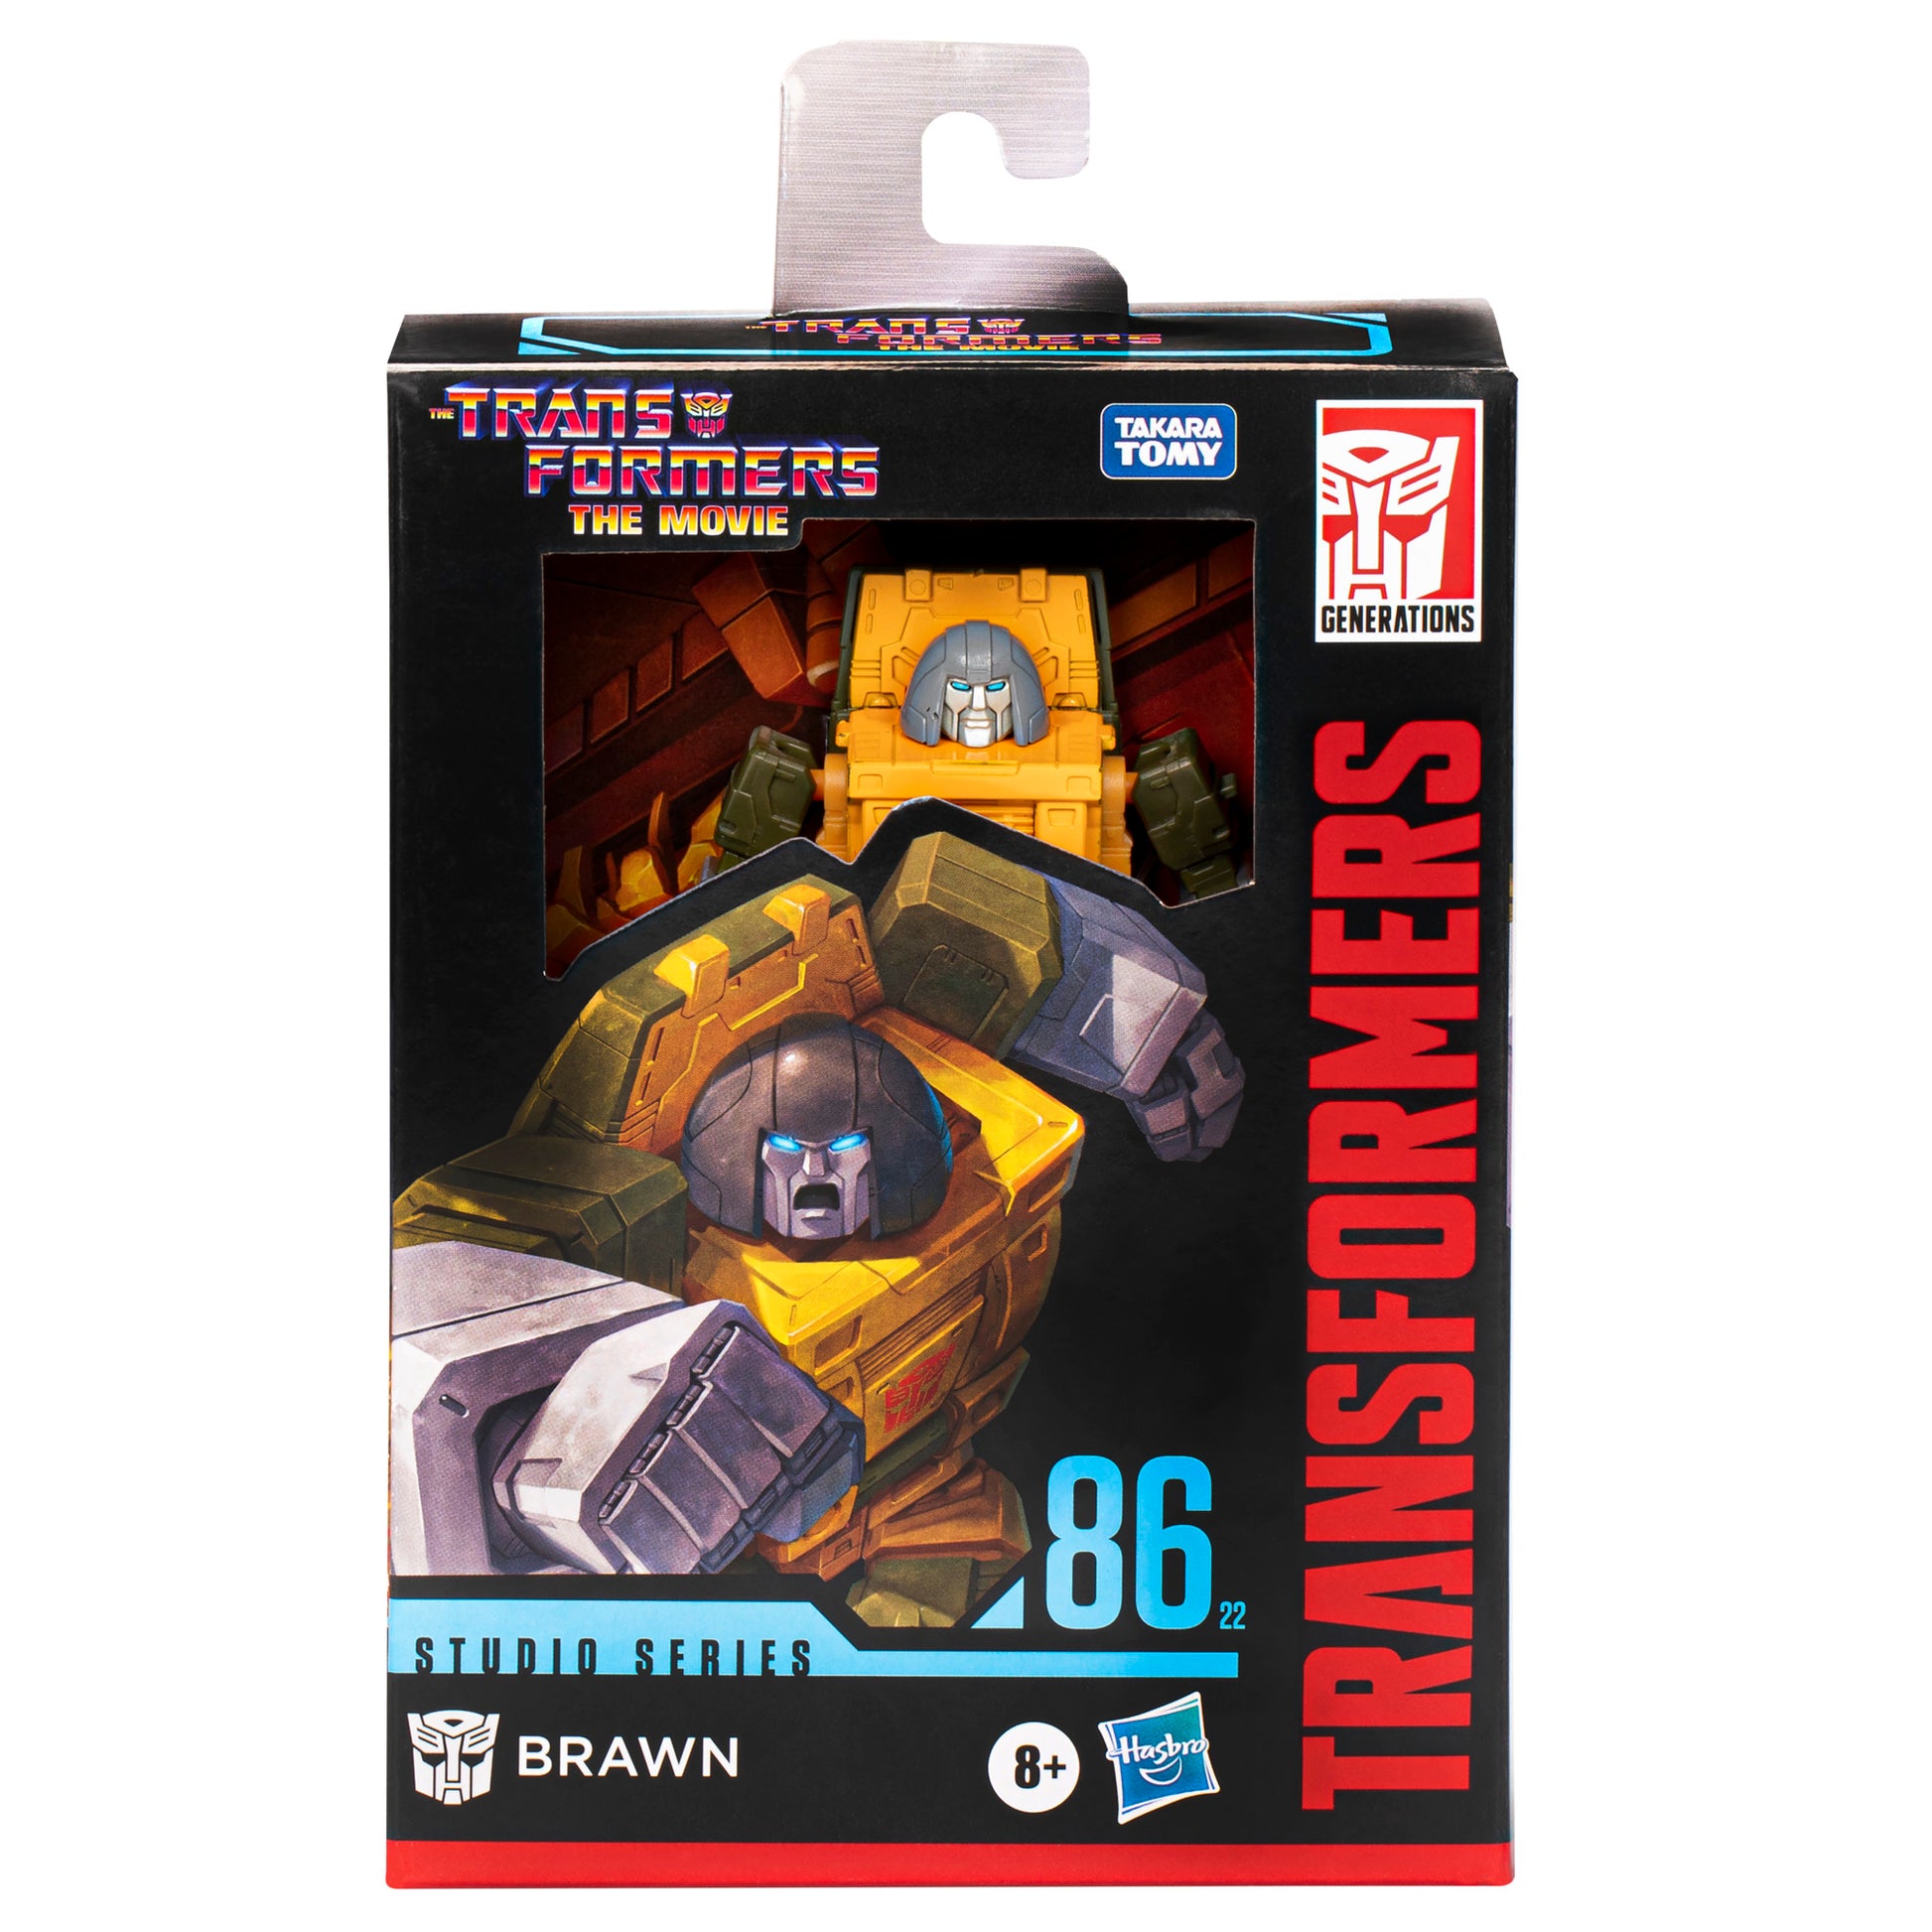 Transformers Studio Series Deluxe The Transformers: The Movie 86-22 Brawn - Heretoserveyou